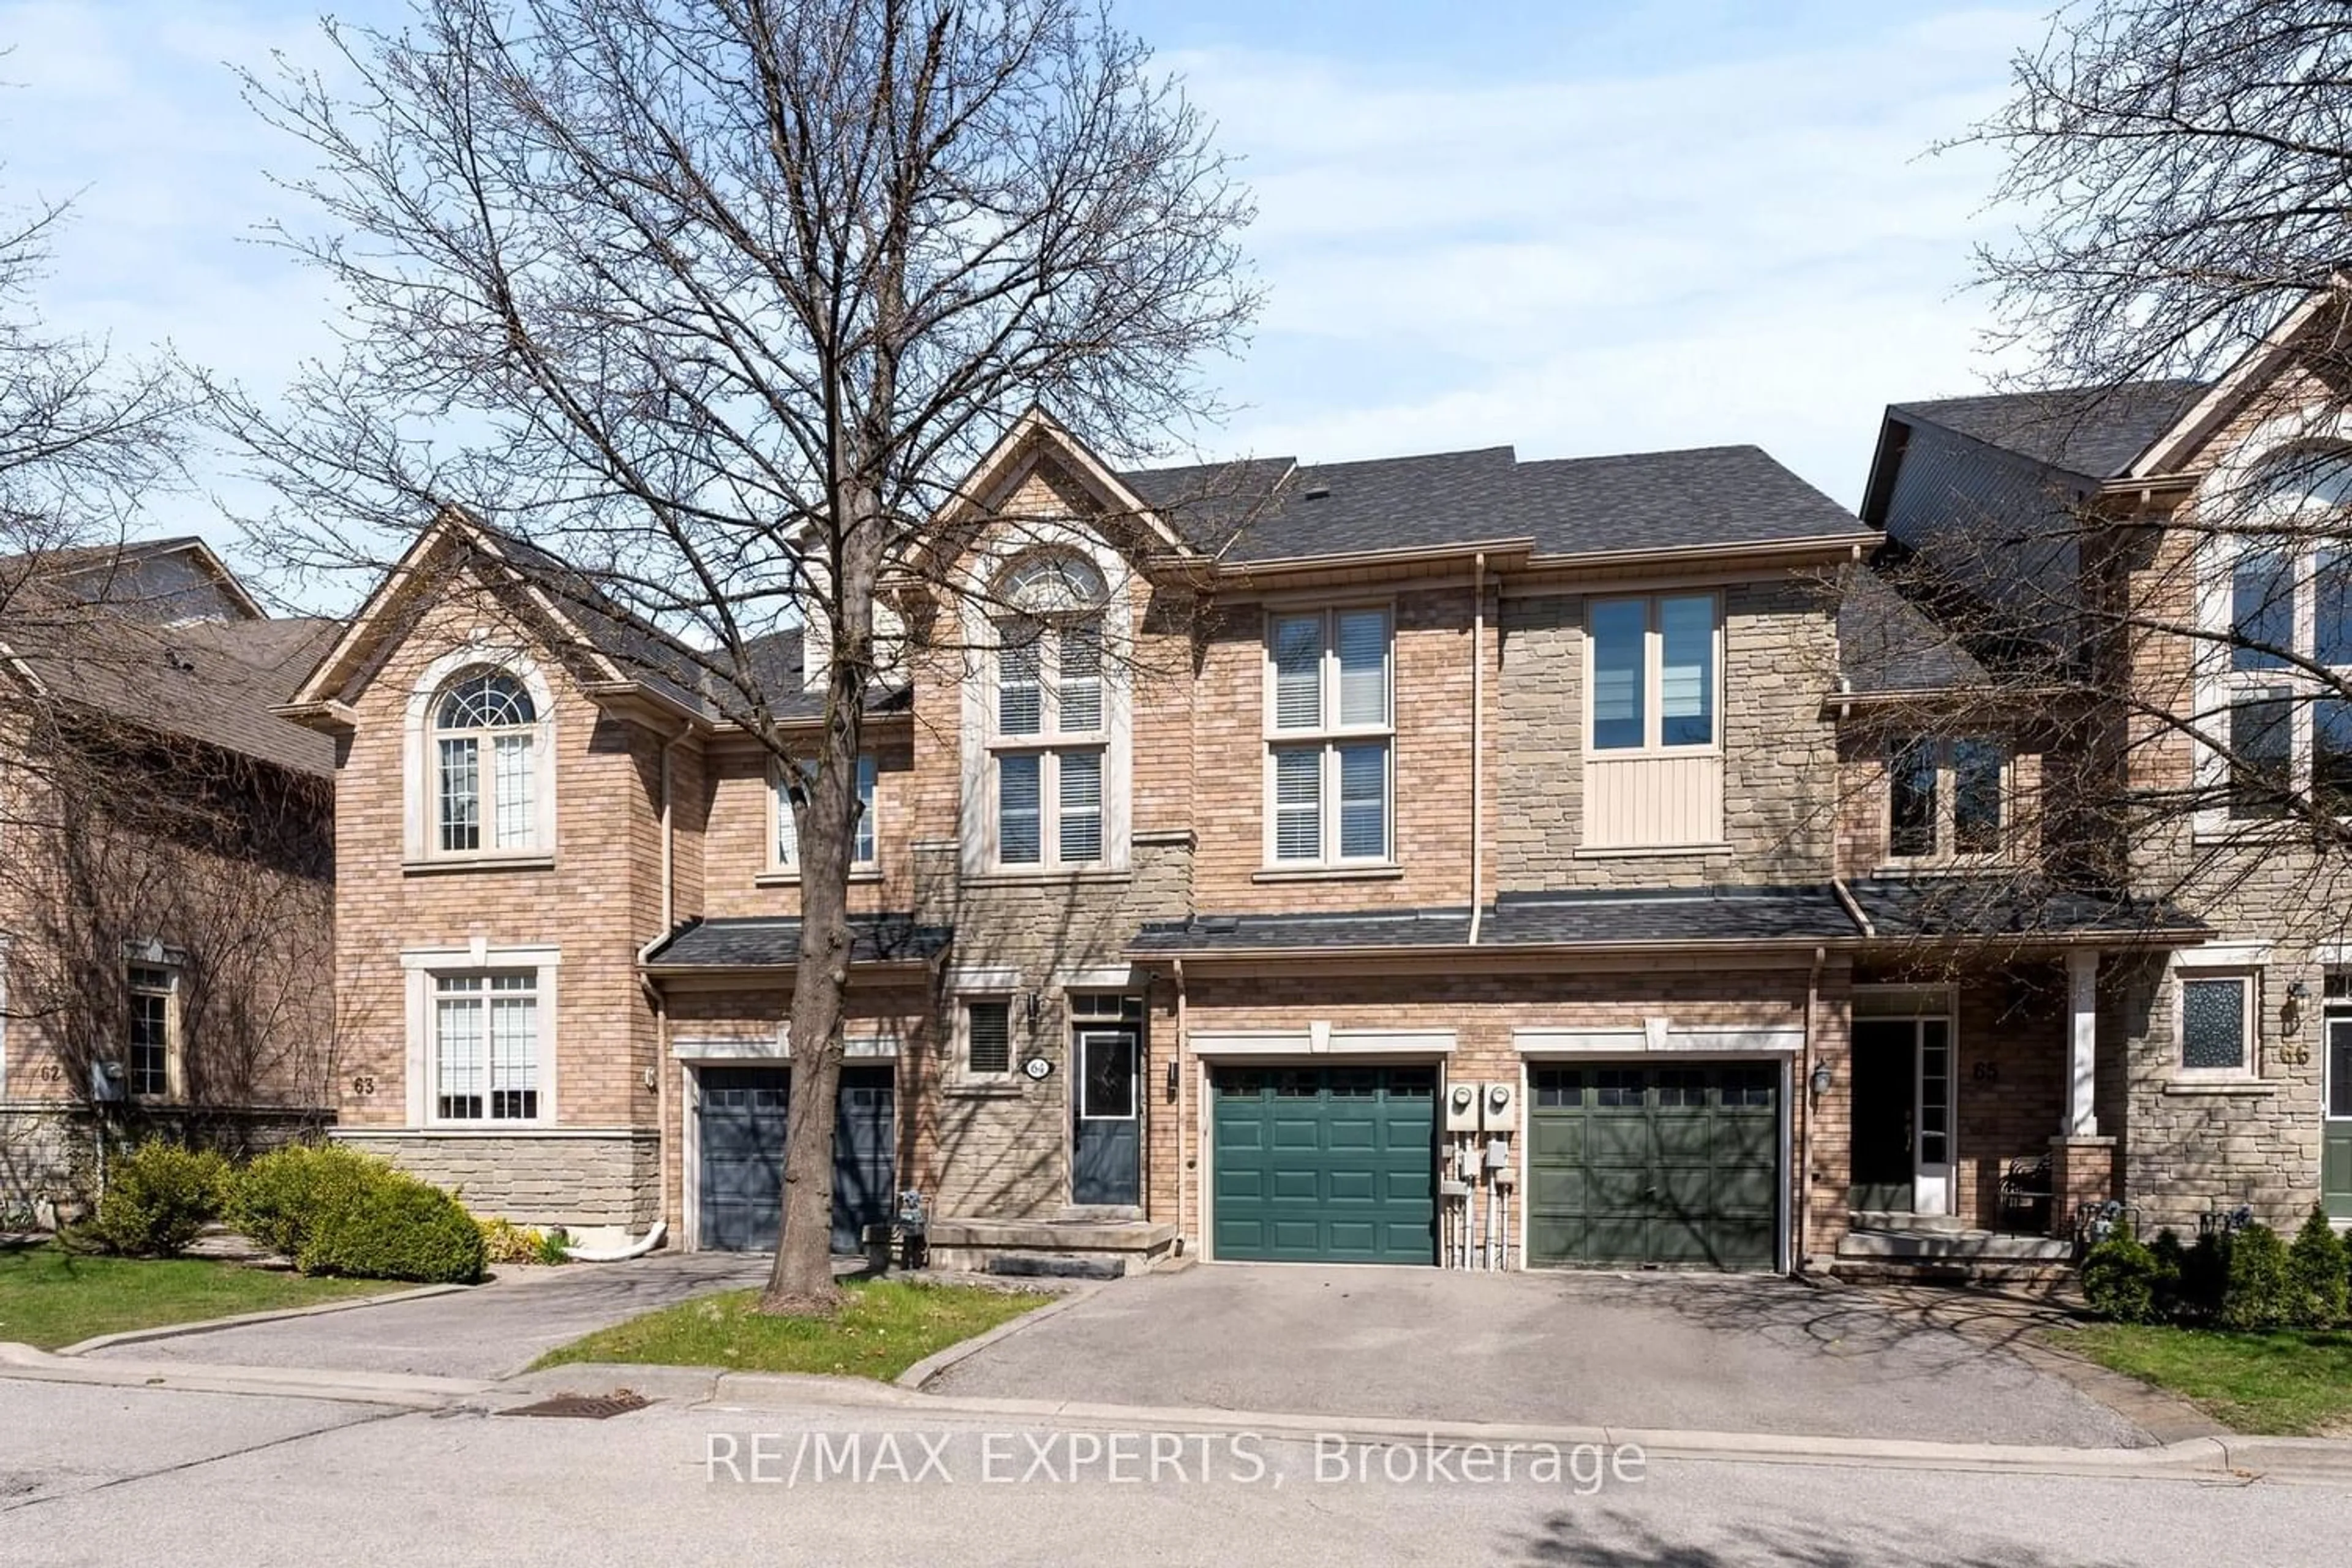 Home with brick exterior material for 180 Blue Willow Dr #64, Vaughan Ontario L4L 9C9